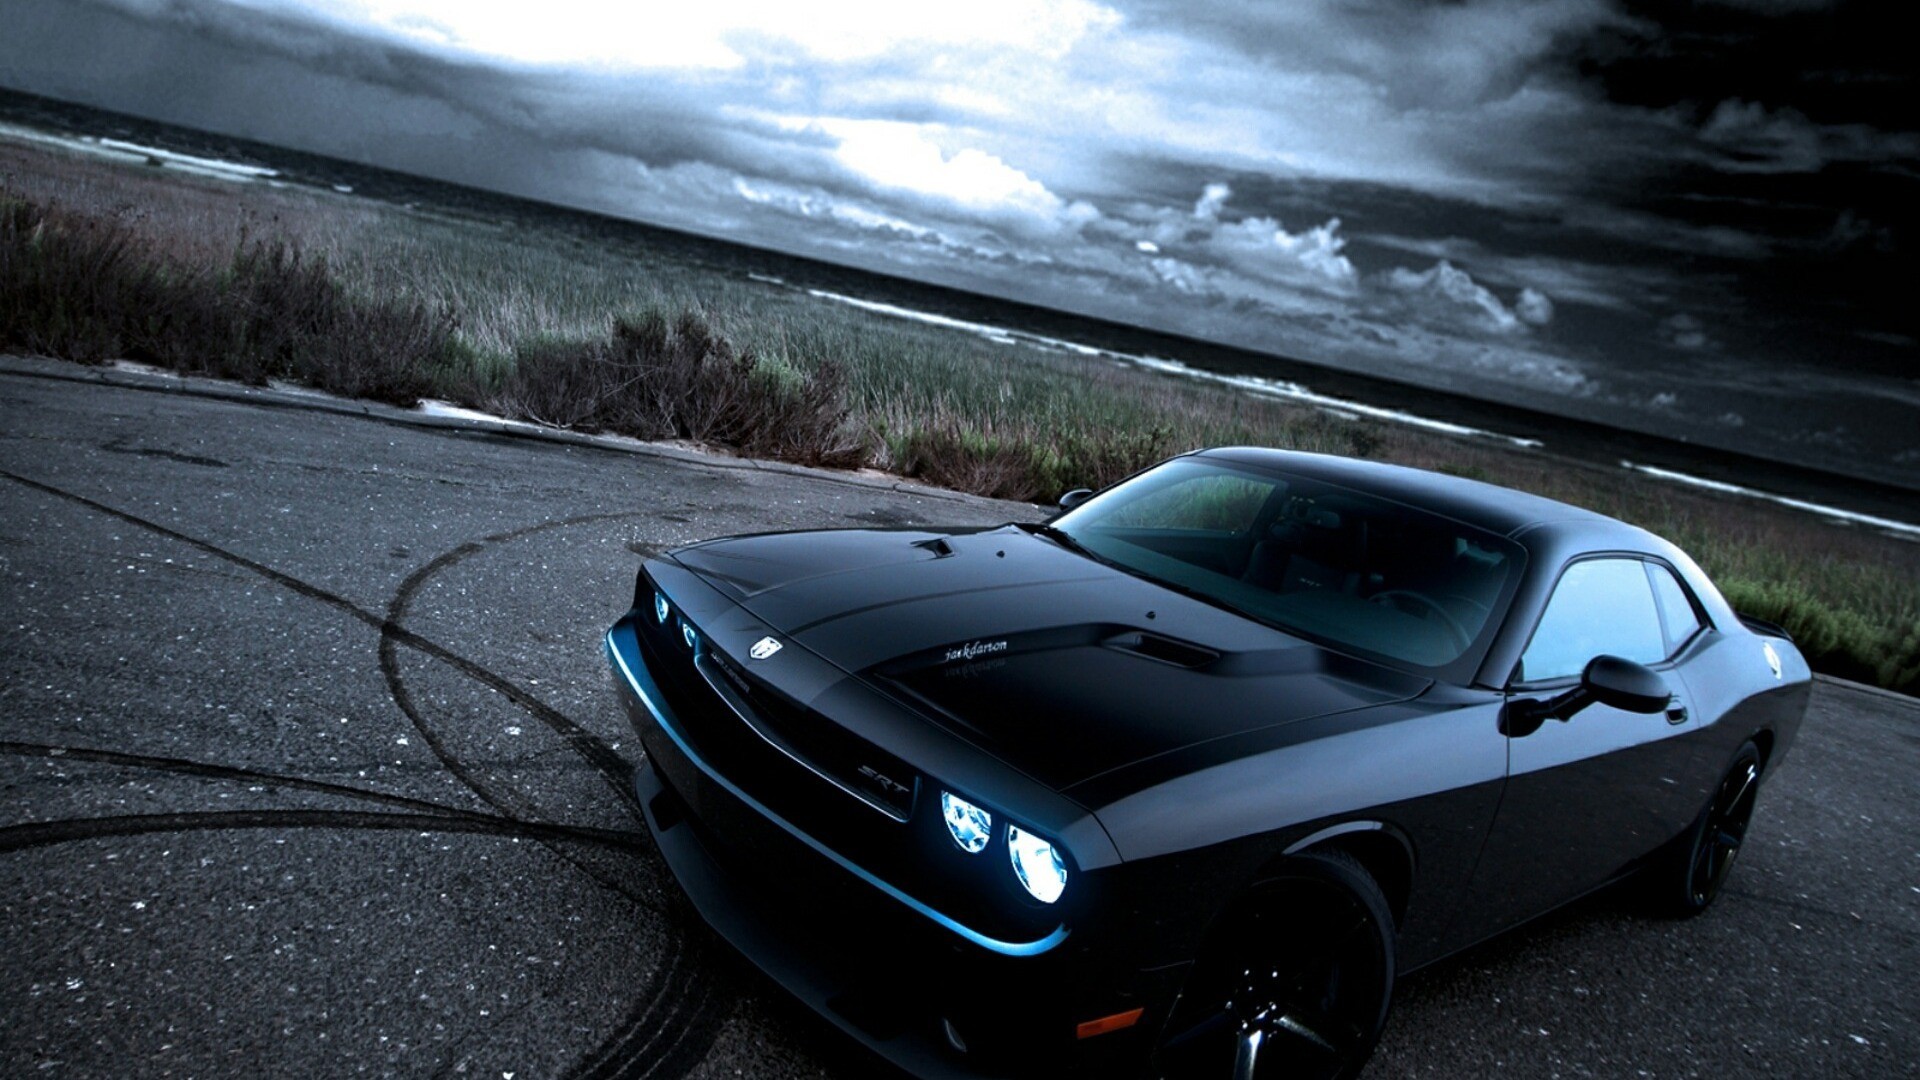 1920x1080 American Black Cars Dodge Dodge Challenger Dodge Challenger Srt Front Angle  View Muscle Cars. hd muscle car wallpapers  danasrfitop